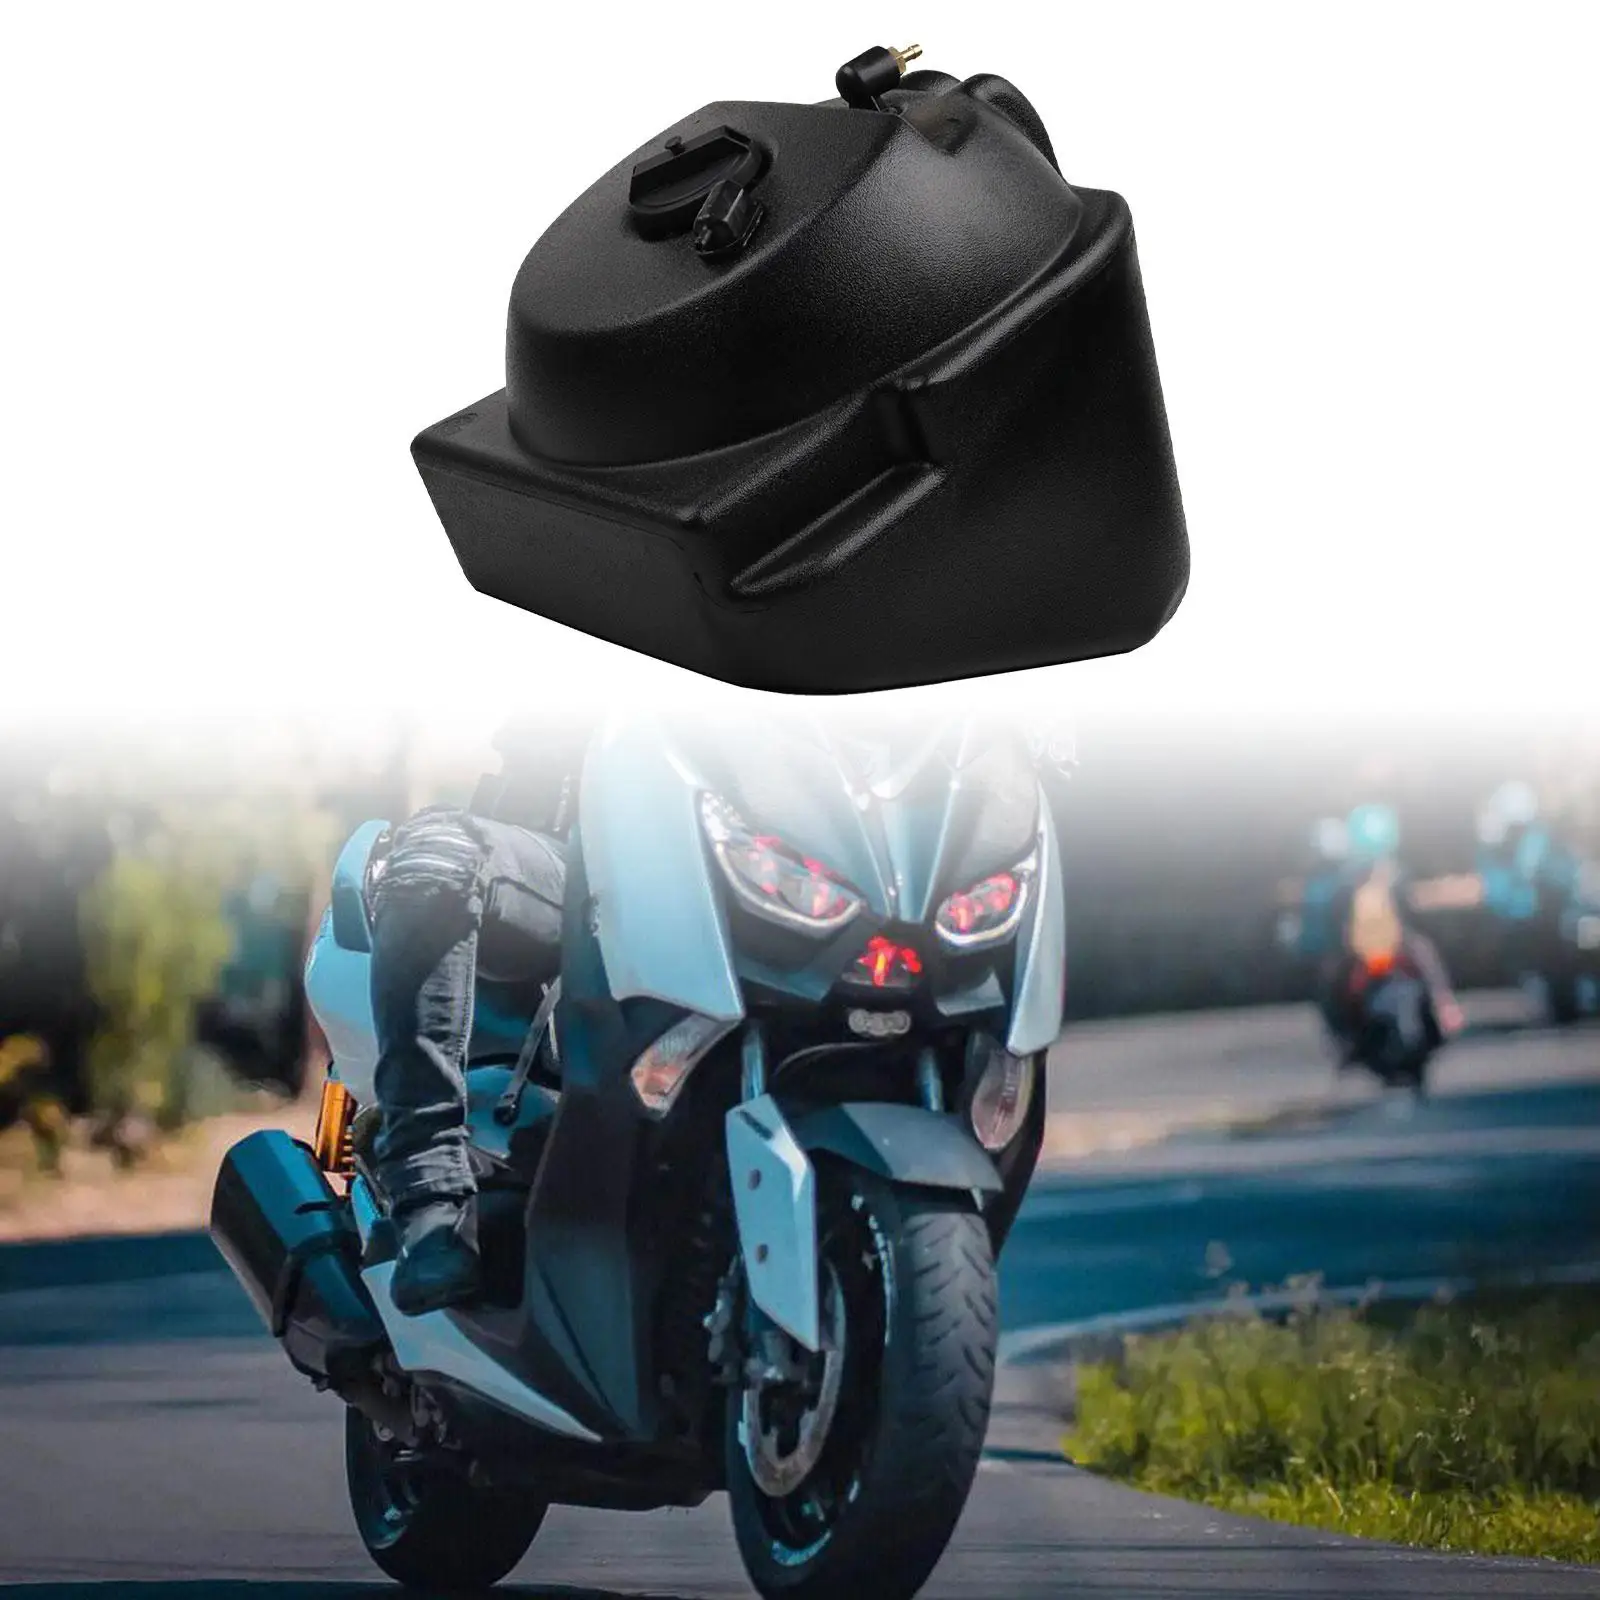 Black Auxiliary Fuel Tank Motorcycle Fuel Tank Easy Installation Motorcycle